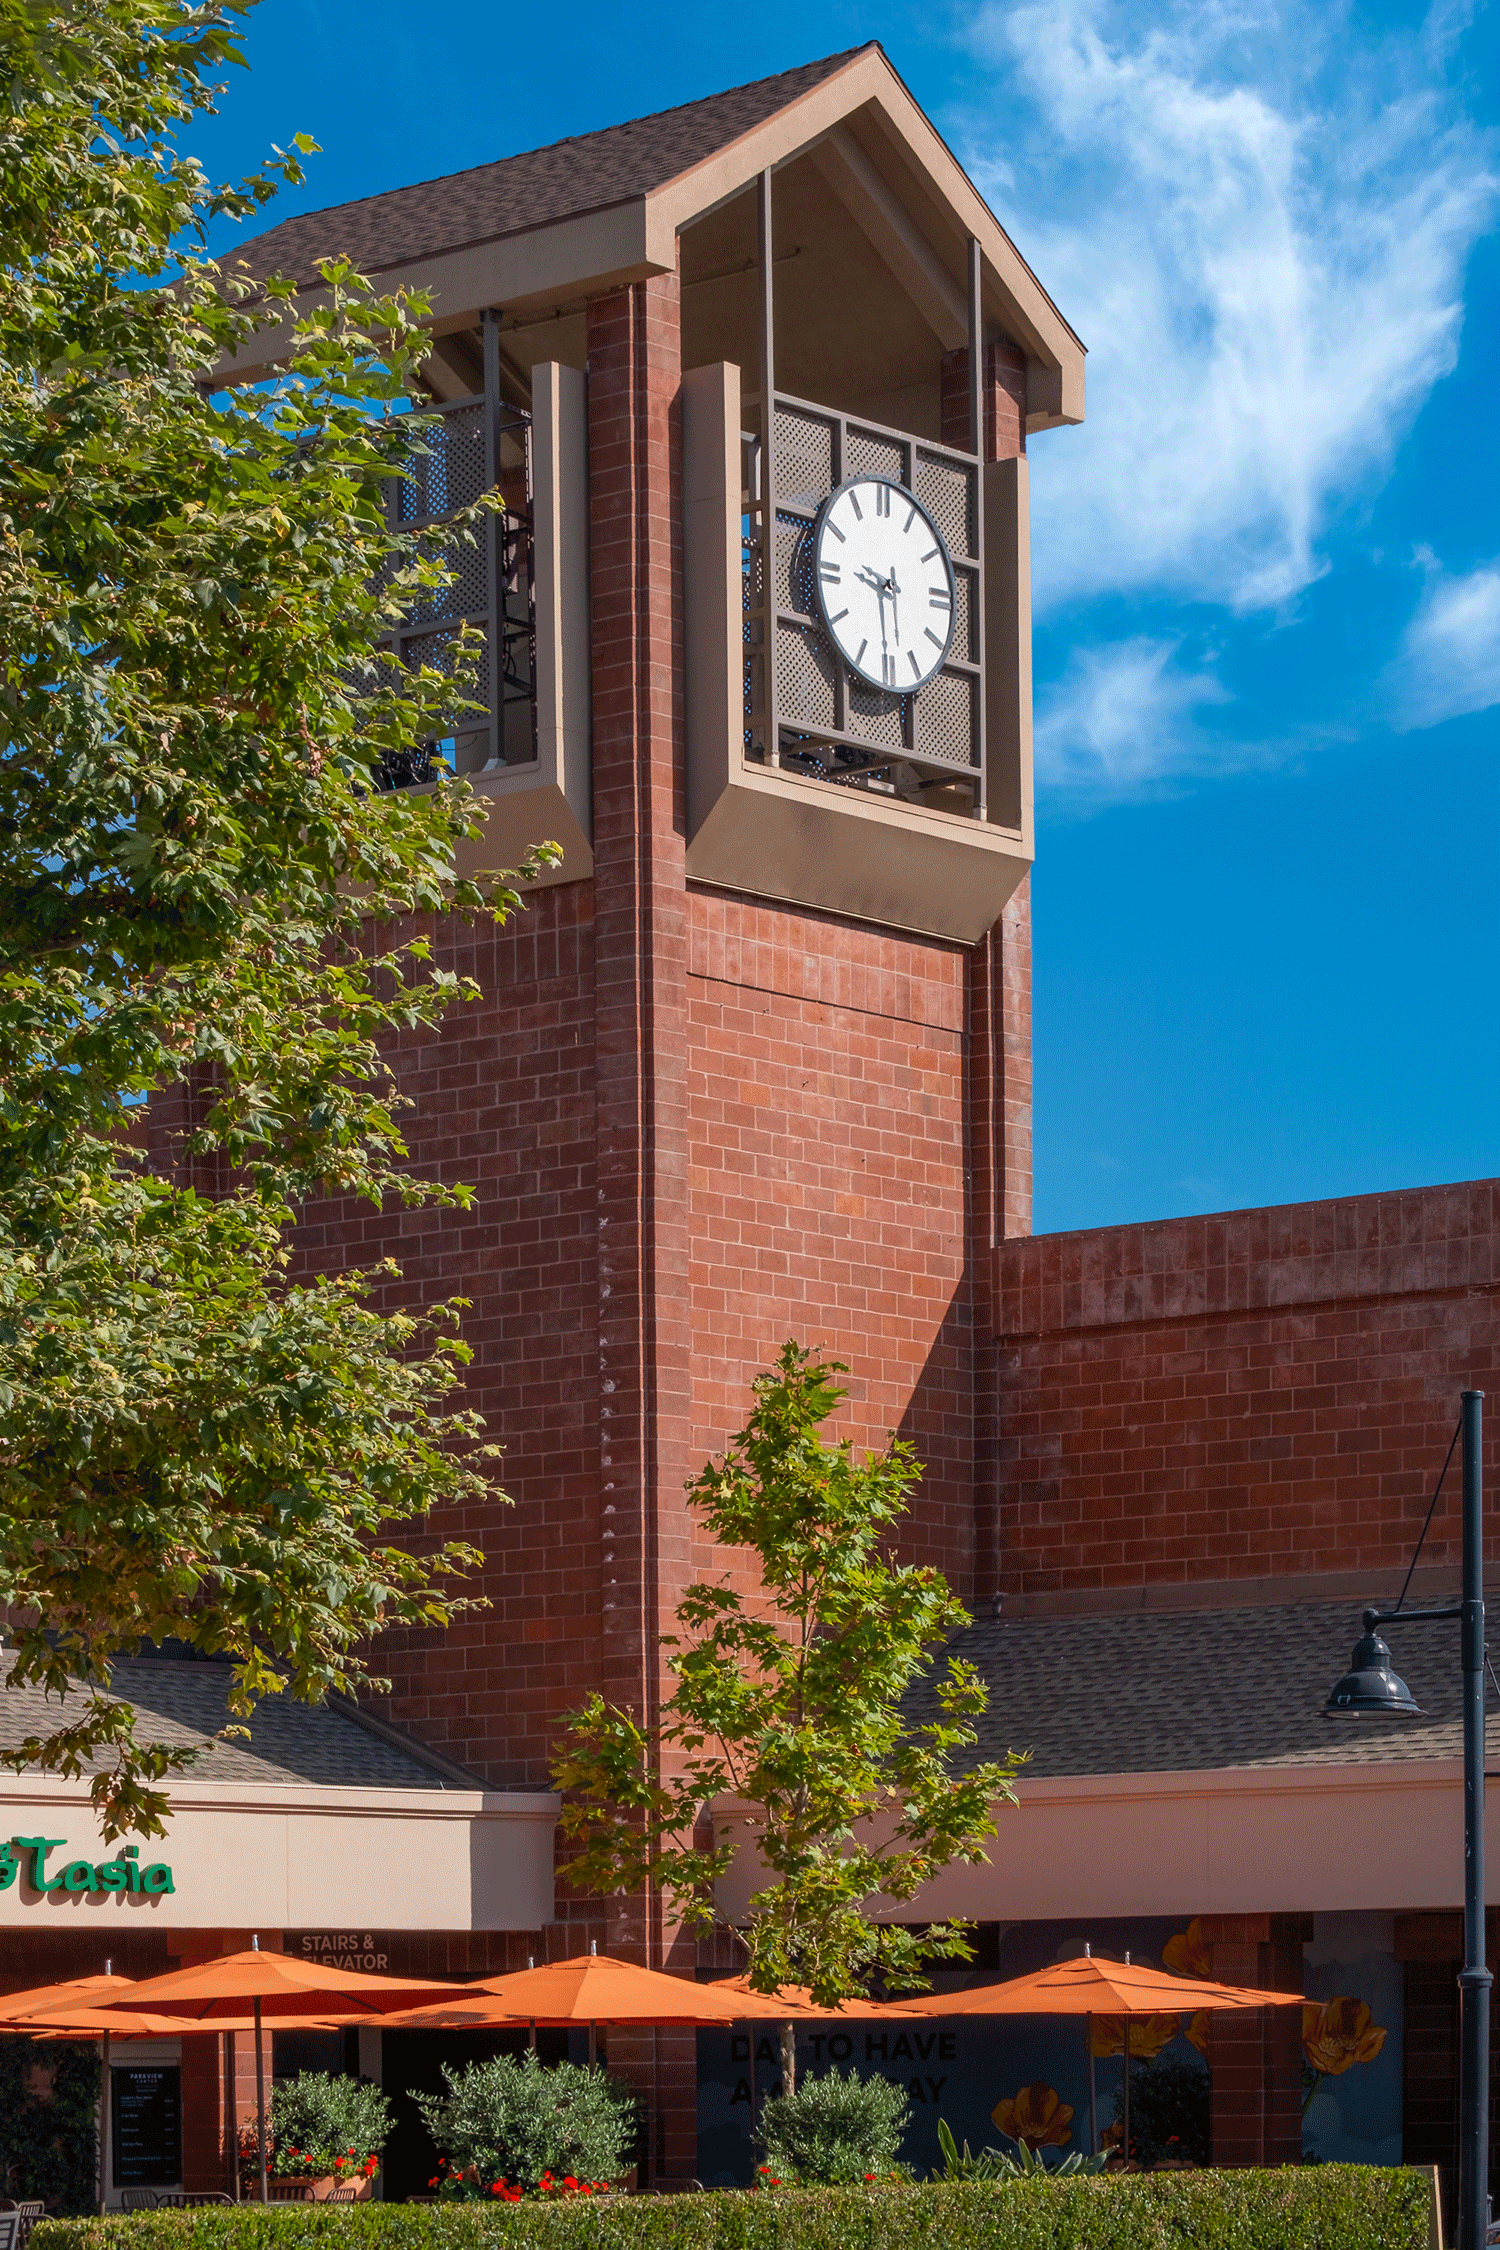  Daytime view of the clock tower at Parkview Center